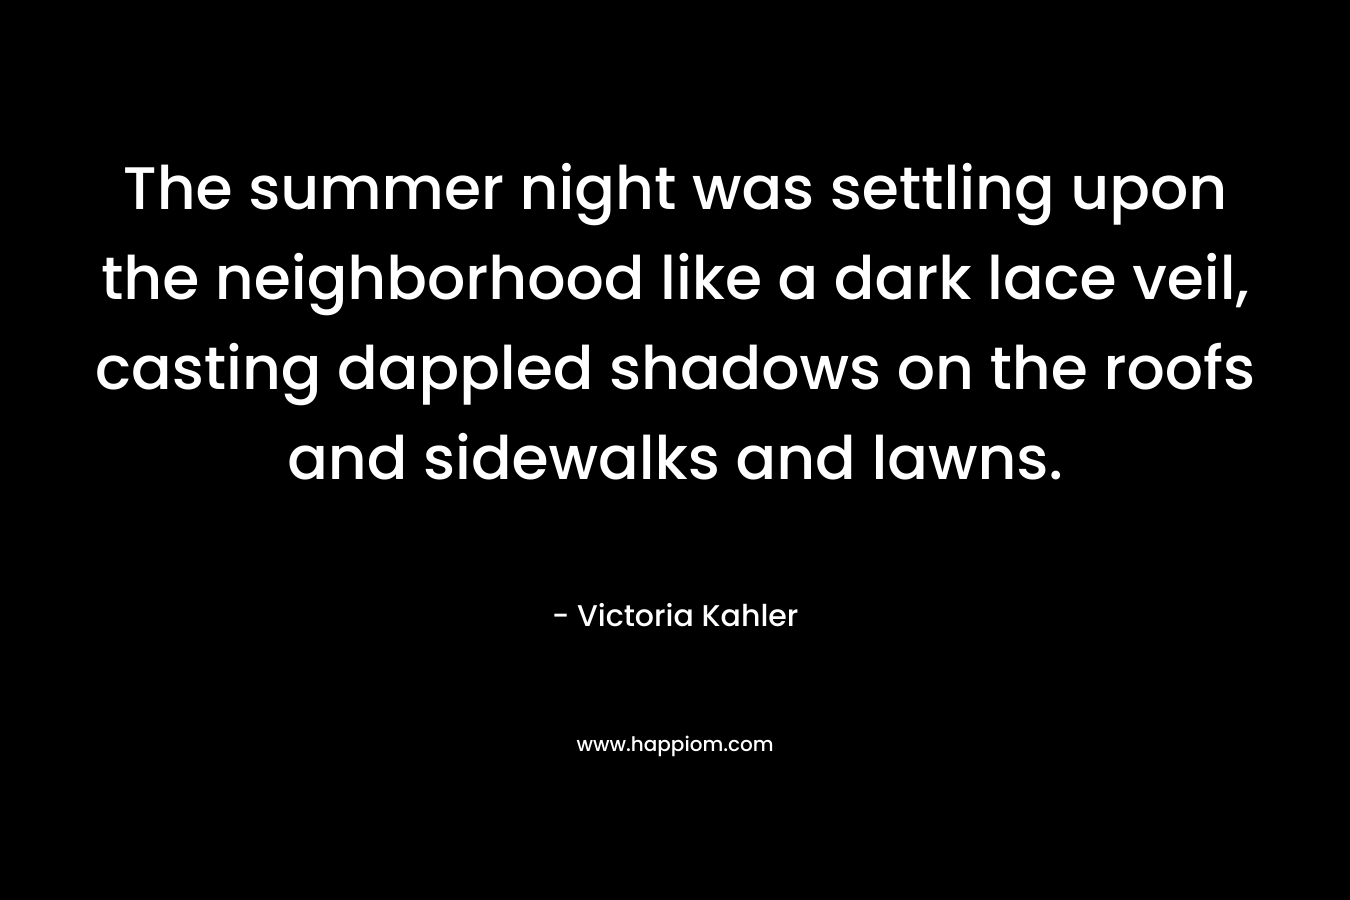 The summer night was settling upon the neighborhood like a dark lace veil, casting dappled shadows on the roofs and sidewalks and lawns. – Victoria Kahler